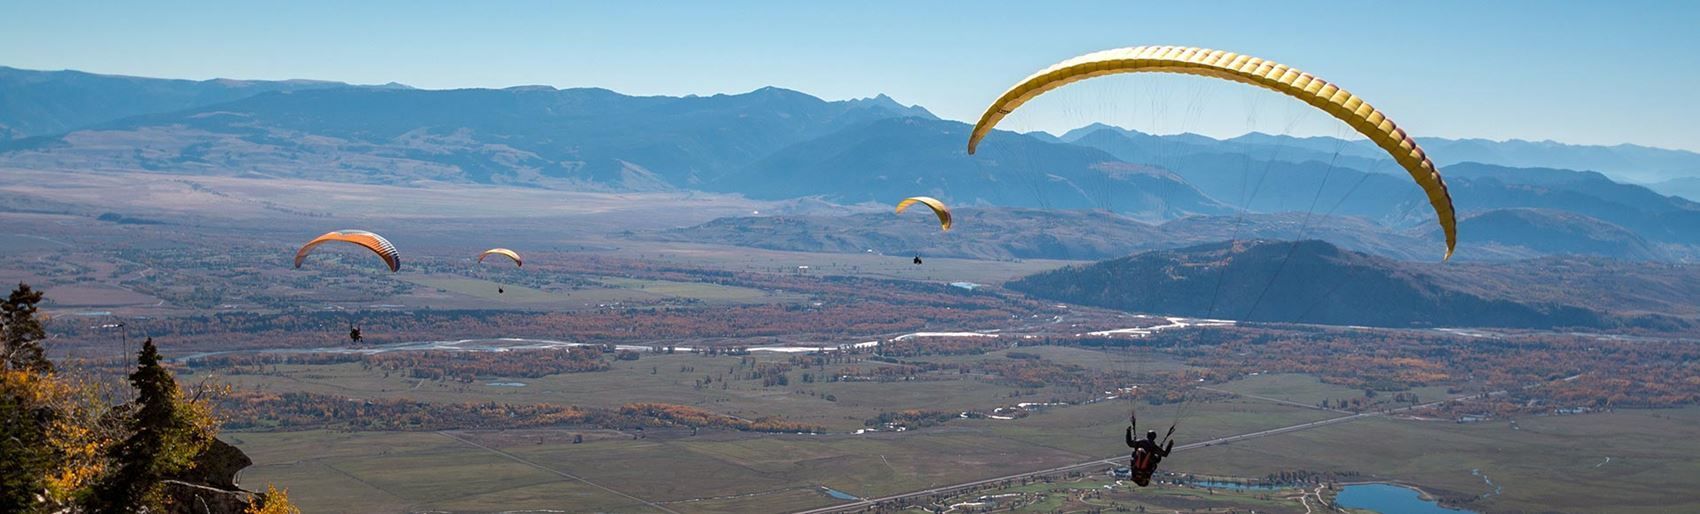 Paragliding in Jackson Hole